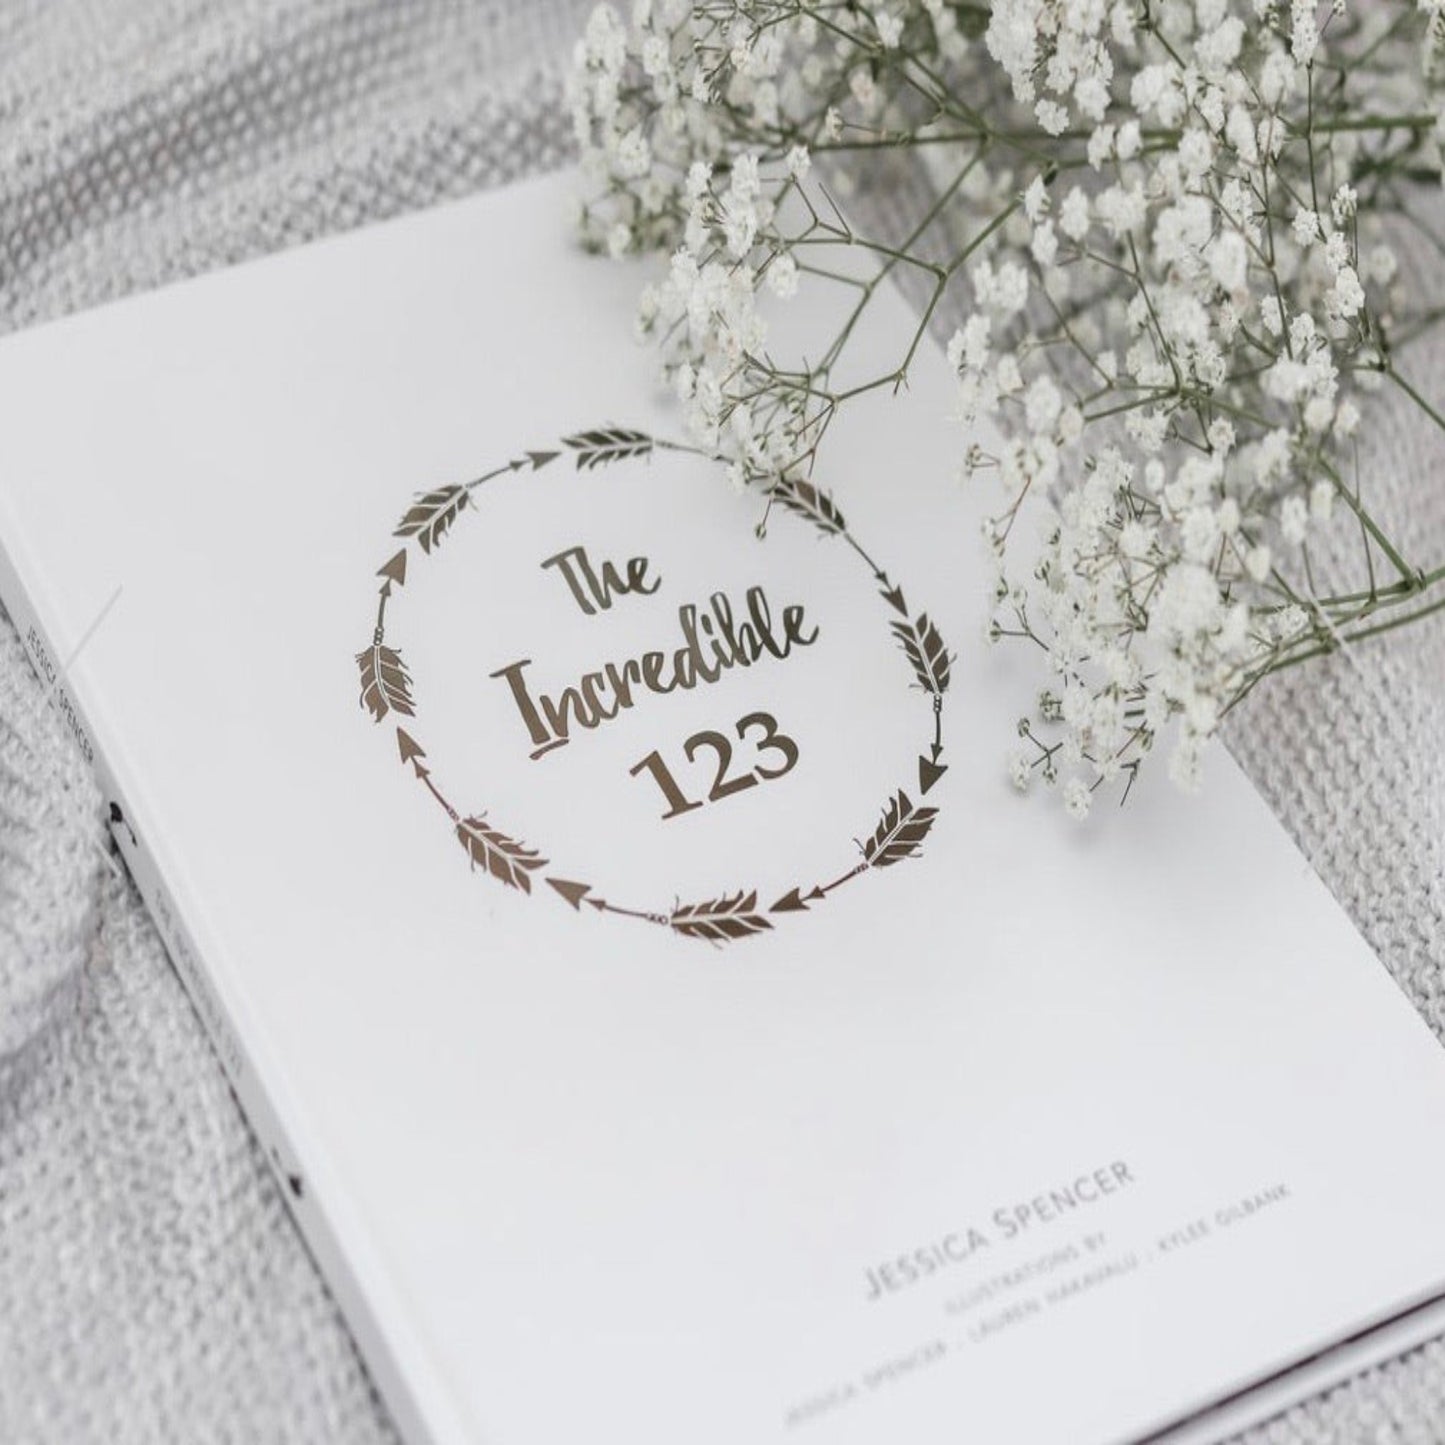 Adored Illustrations Incredible 123 Book